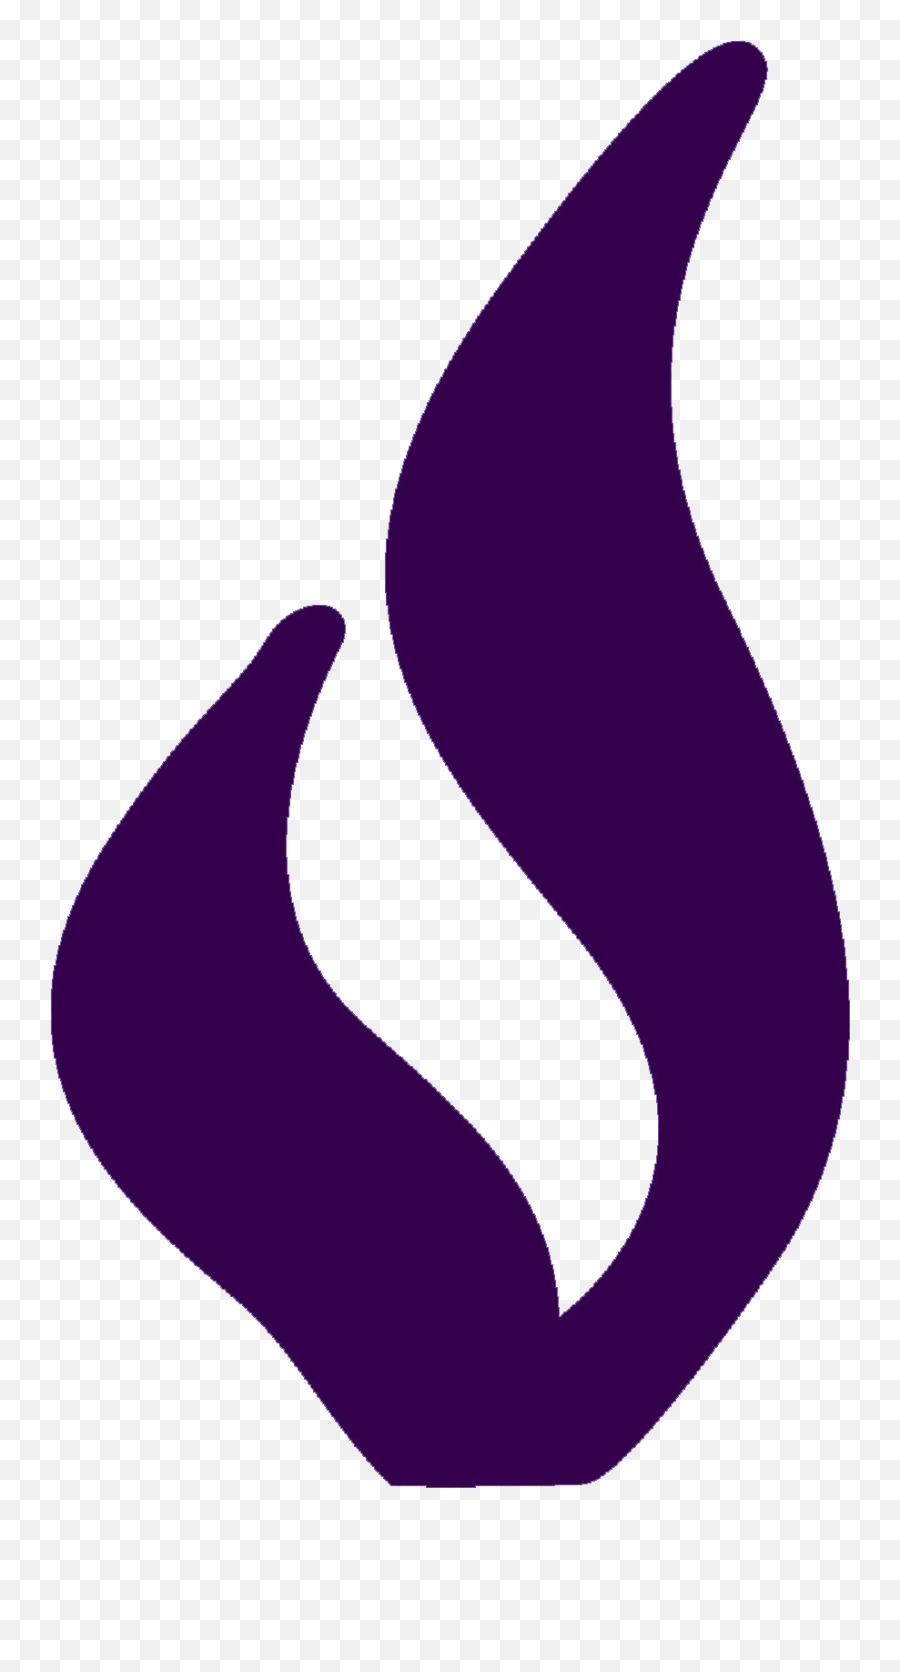 Purple Flame Png - Vertical,Purple Flame Png